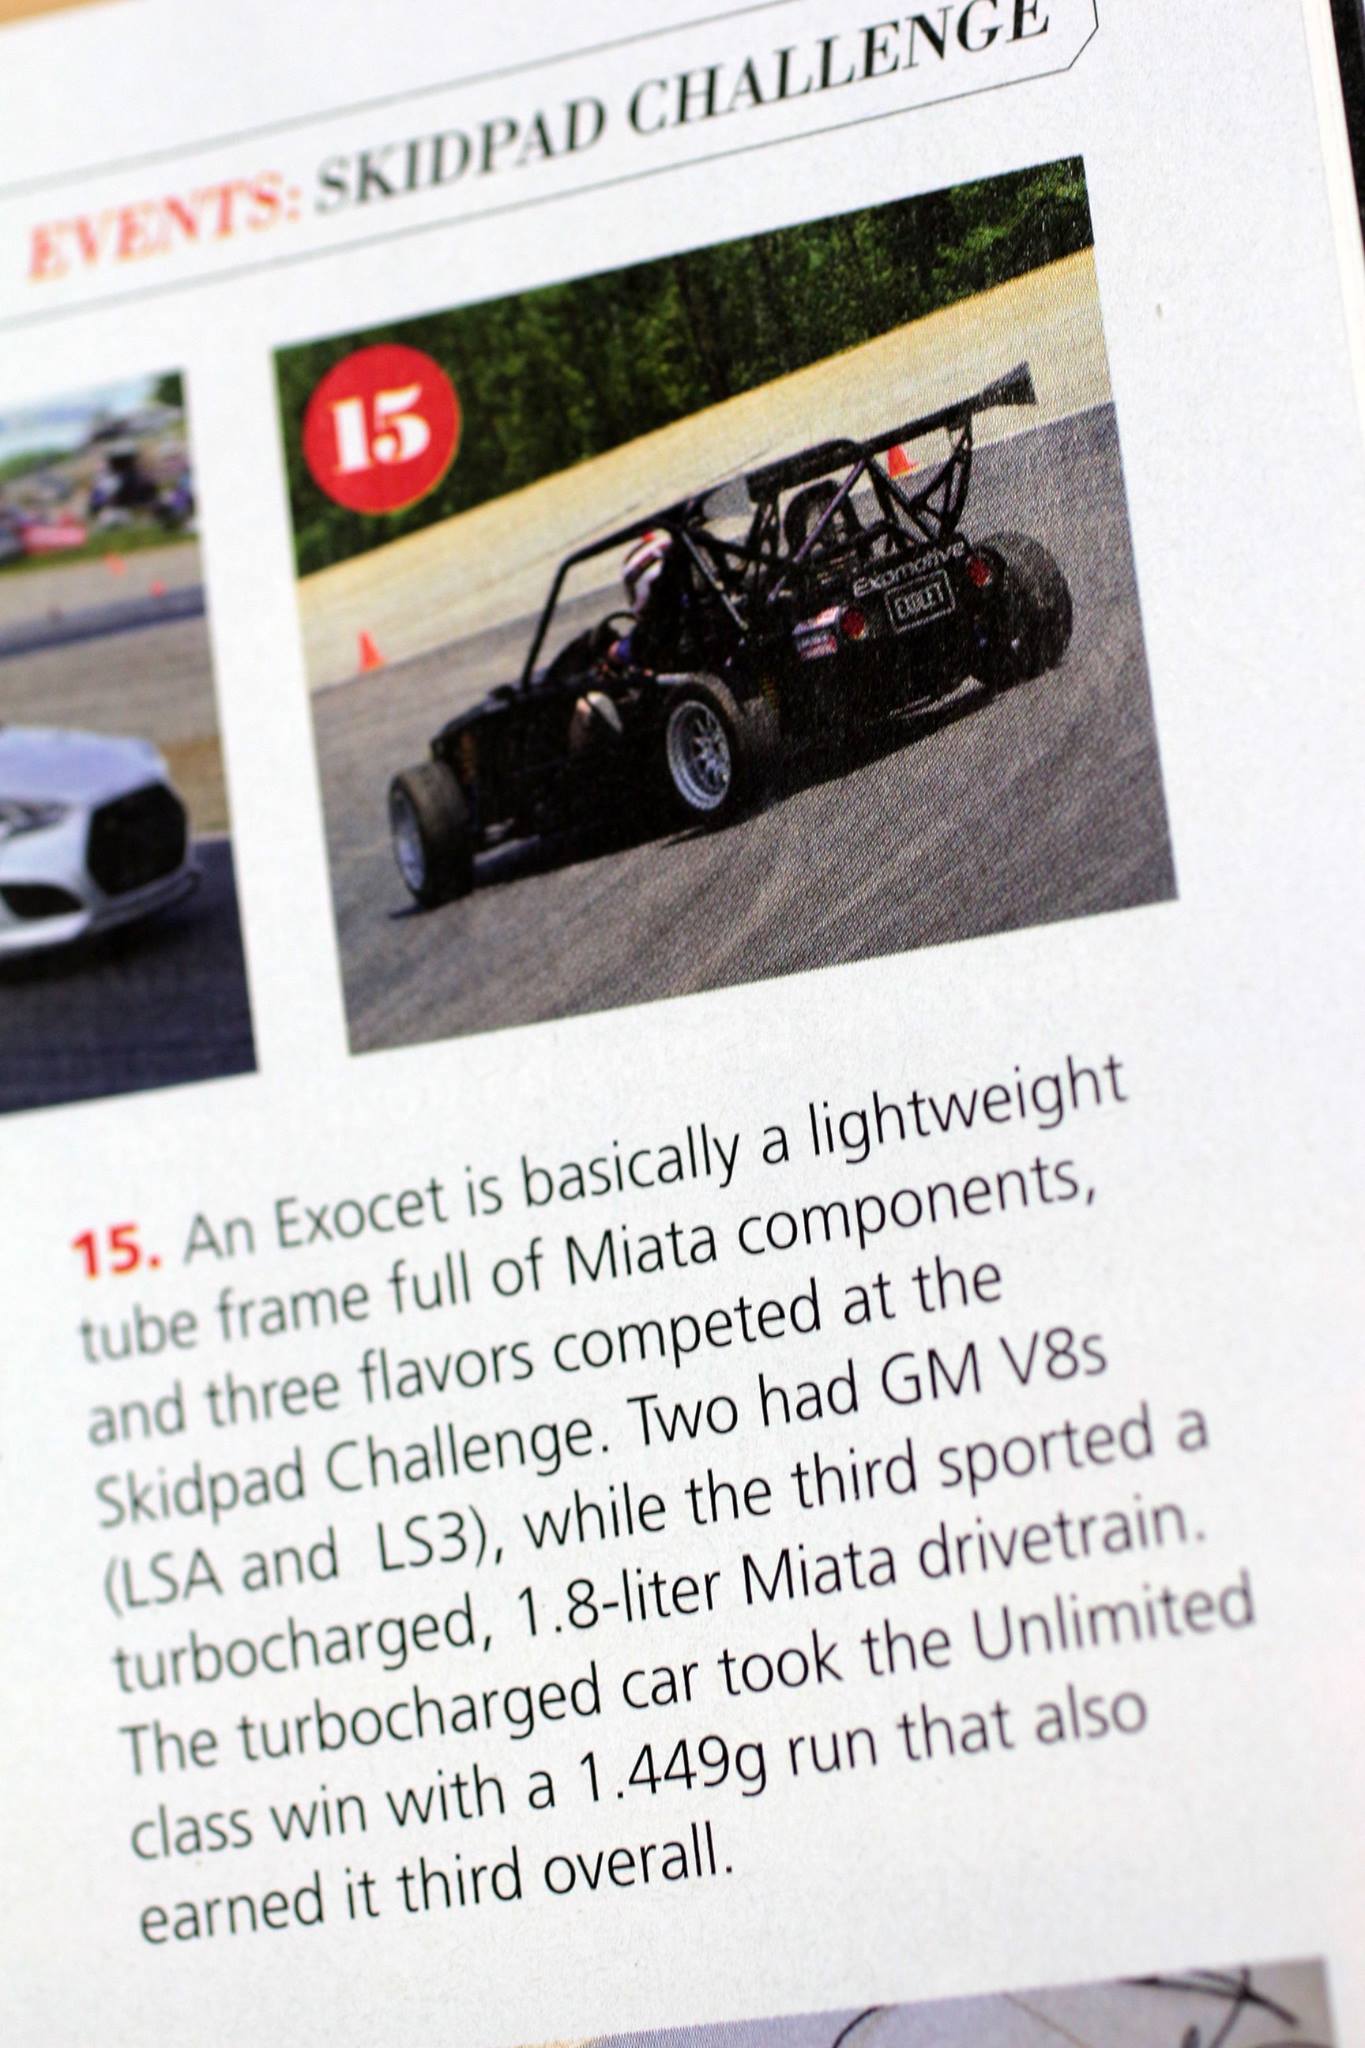 Check out the Exocet feature in Grassroots Motorsports